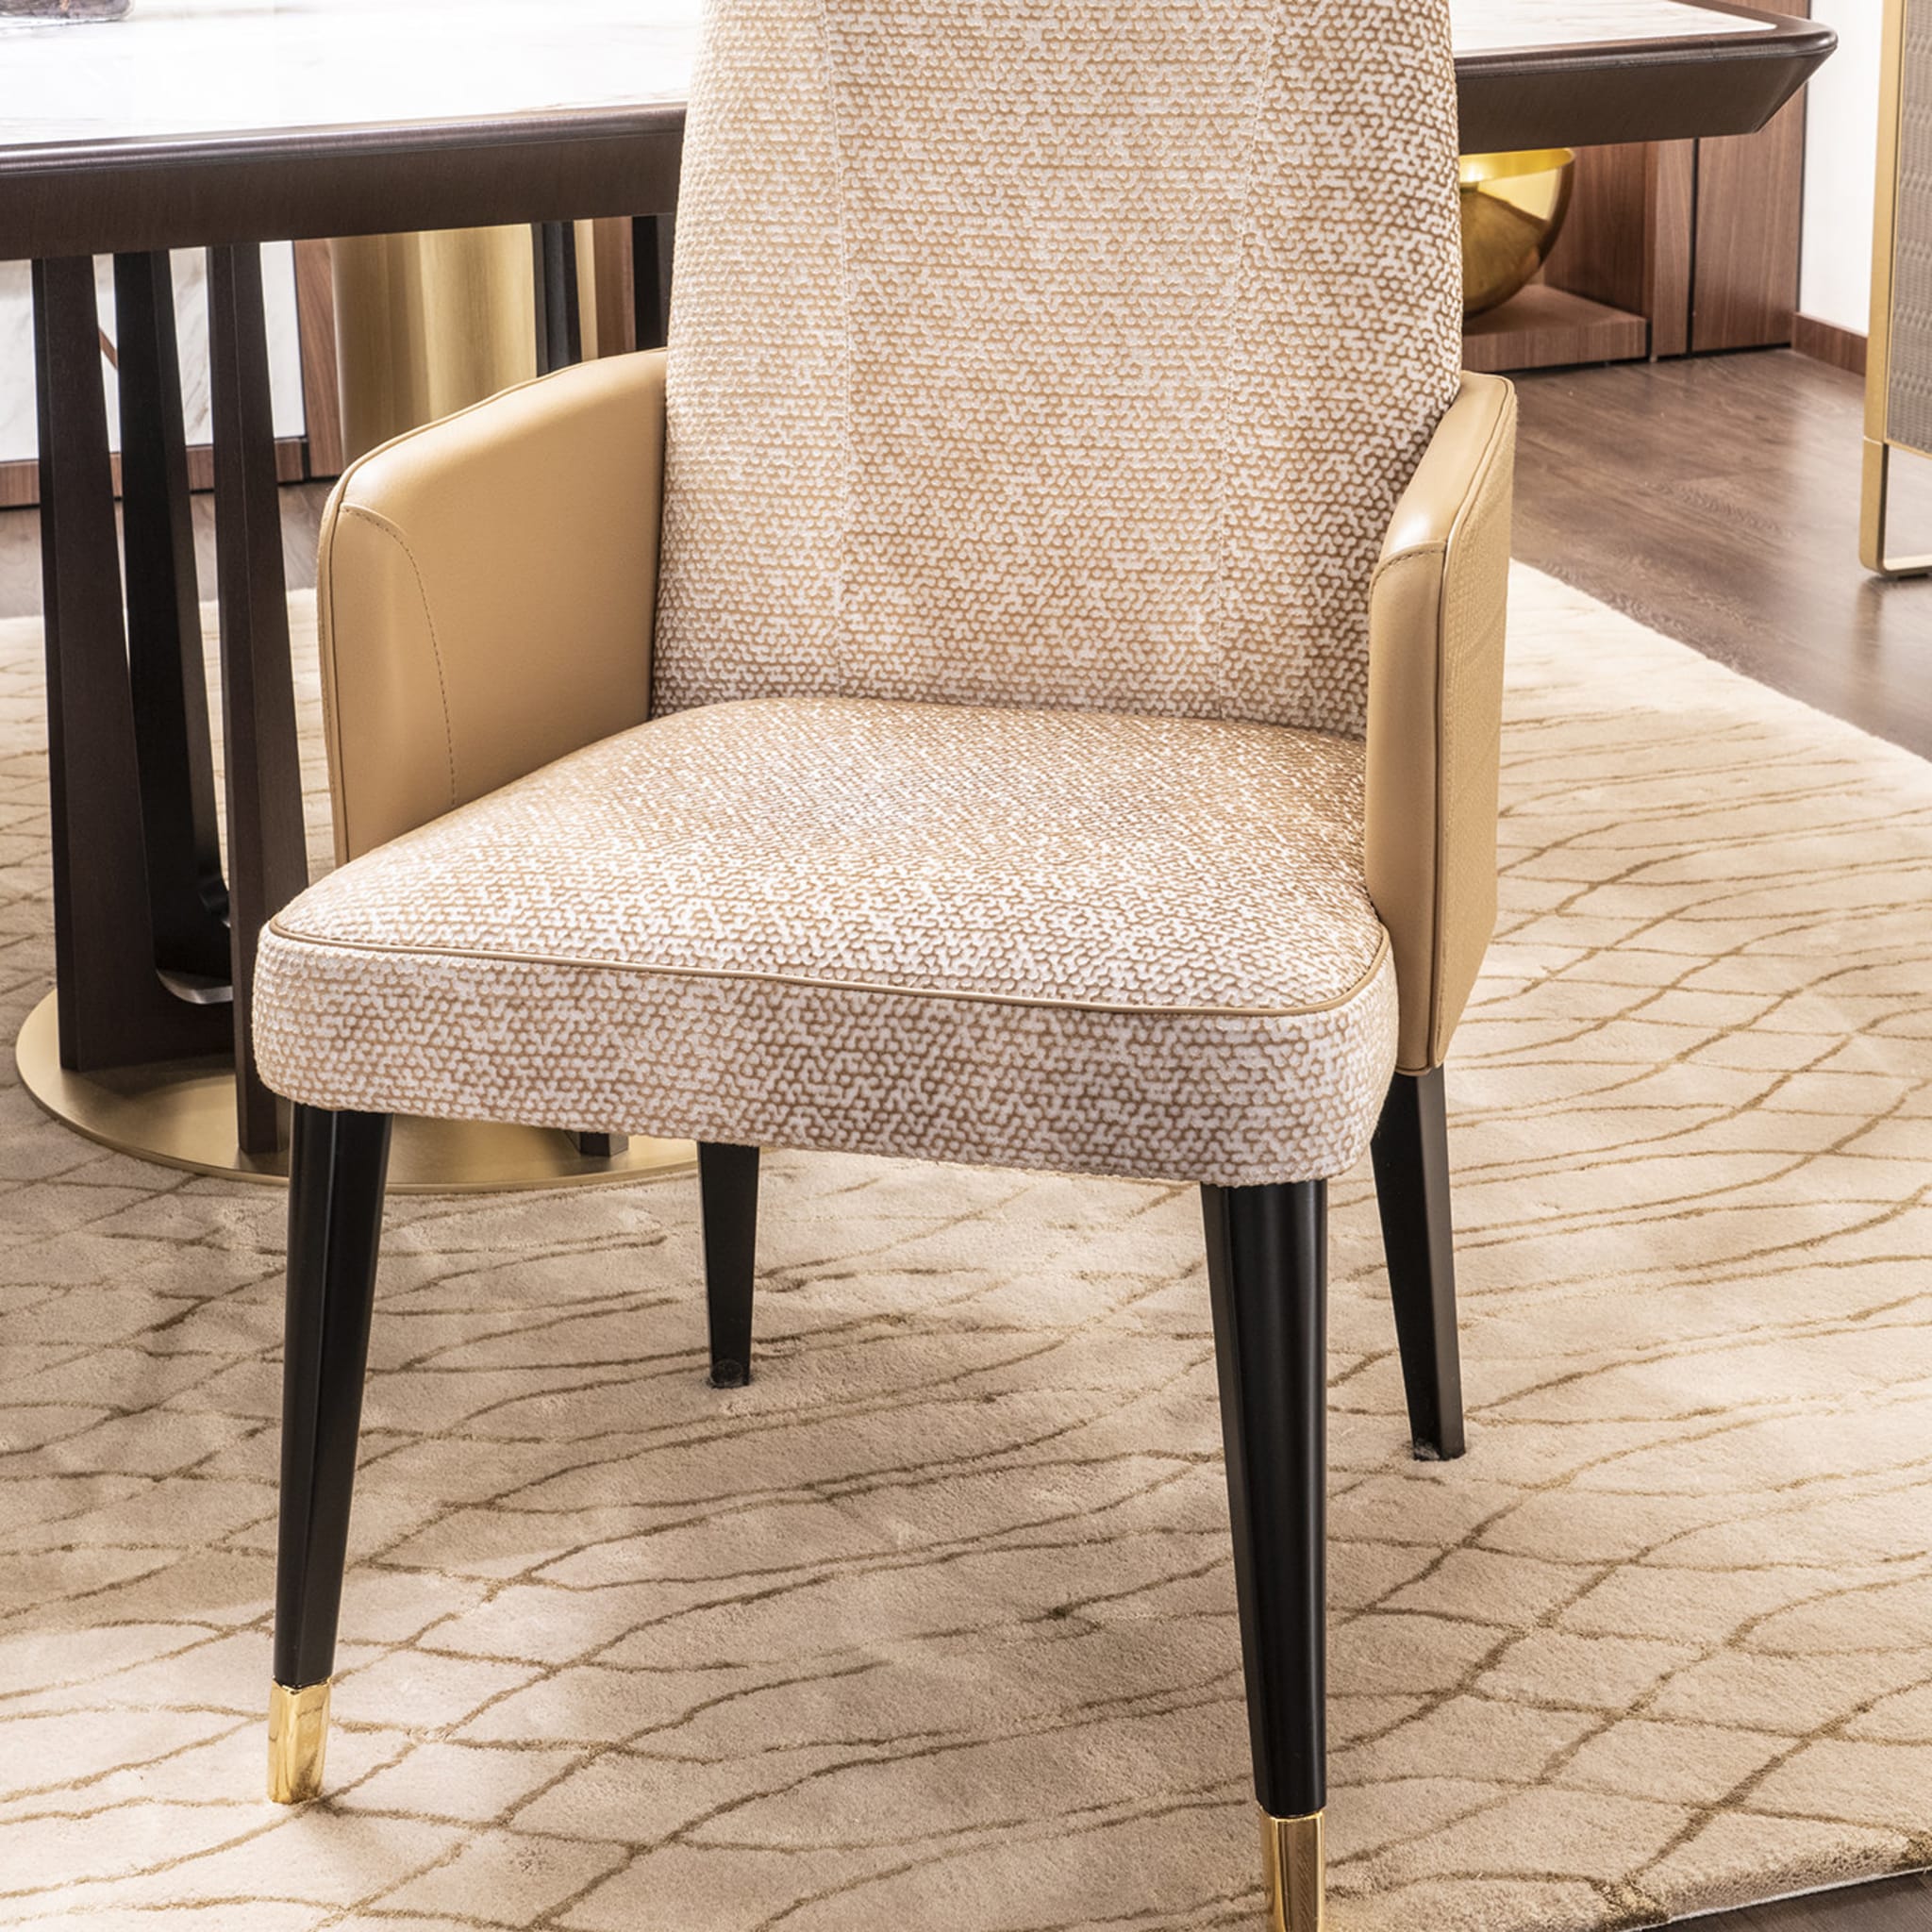 Caprice Dining Chair with Armrests - Alternative view 4